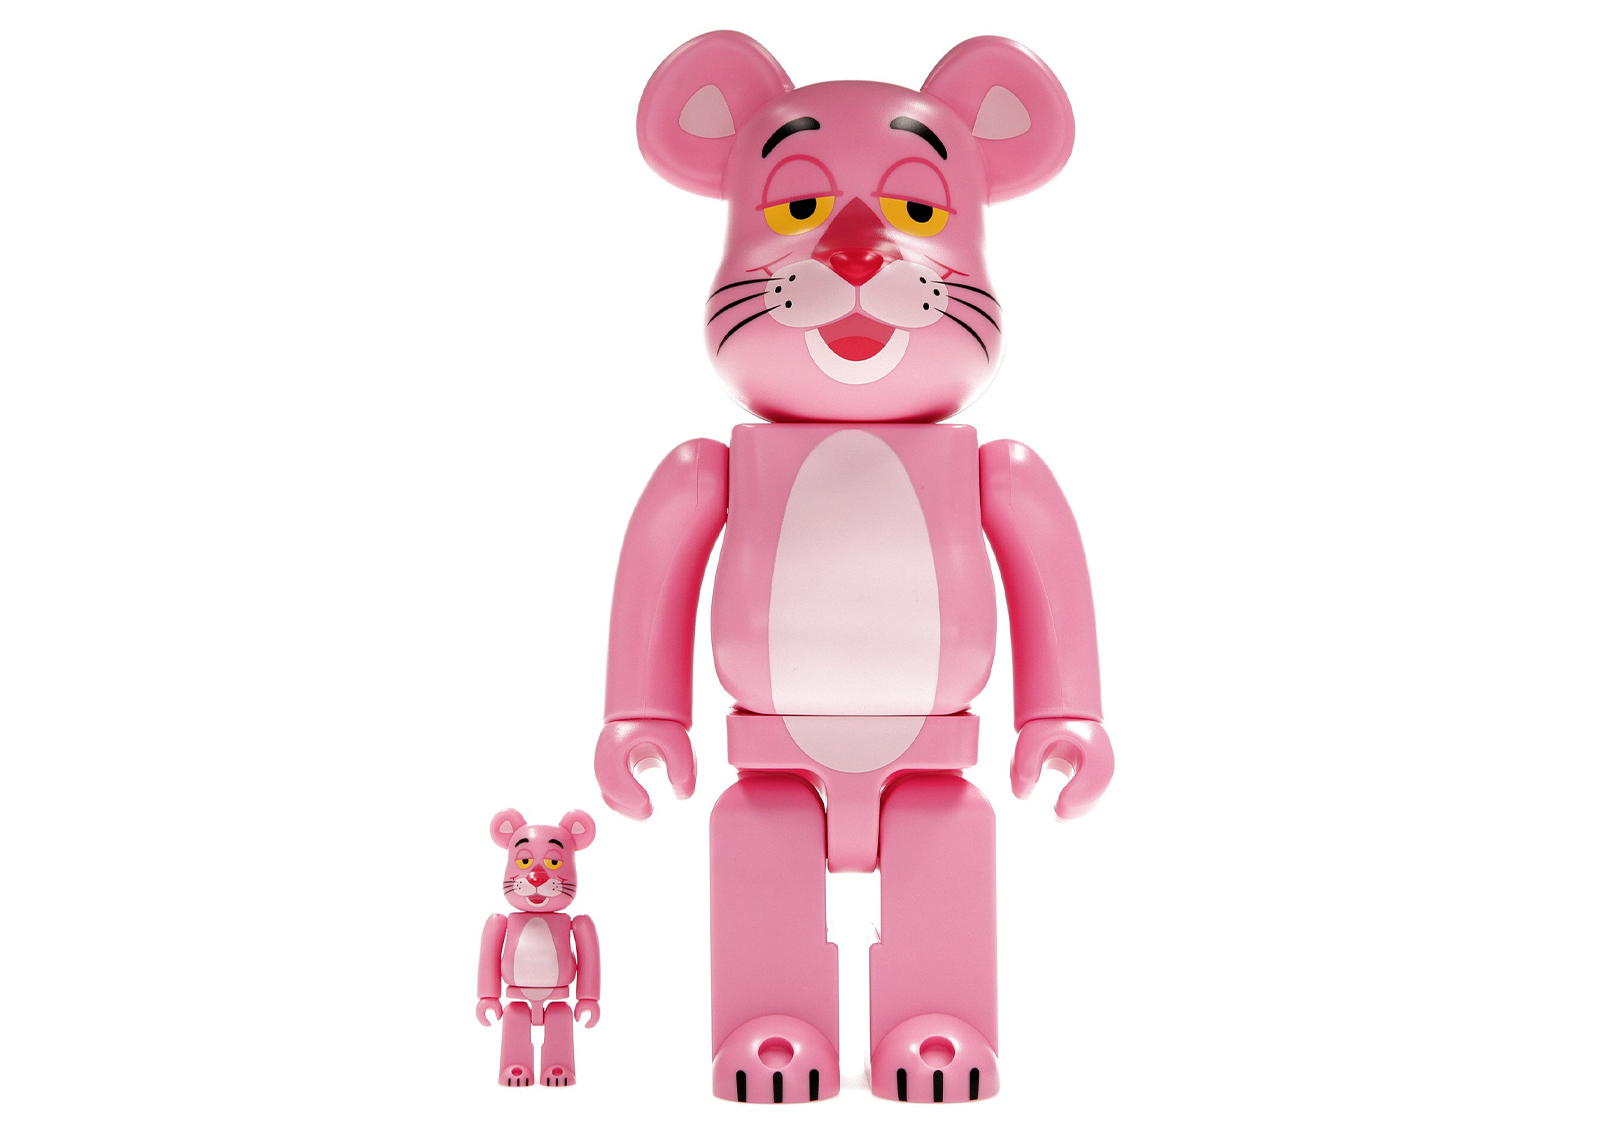 2set Be@rbrick pink panther 100% & 400%その他